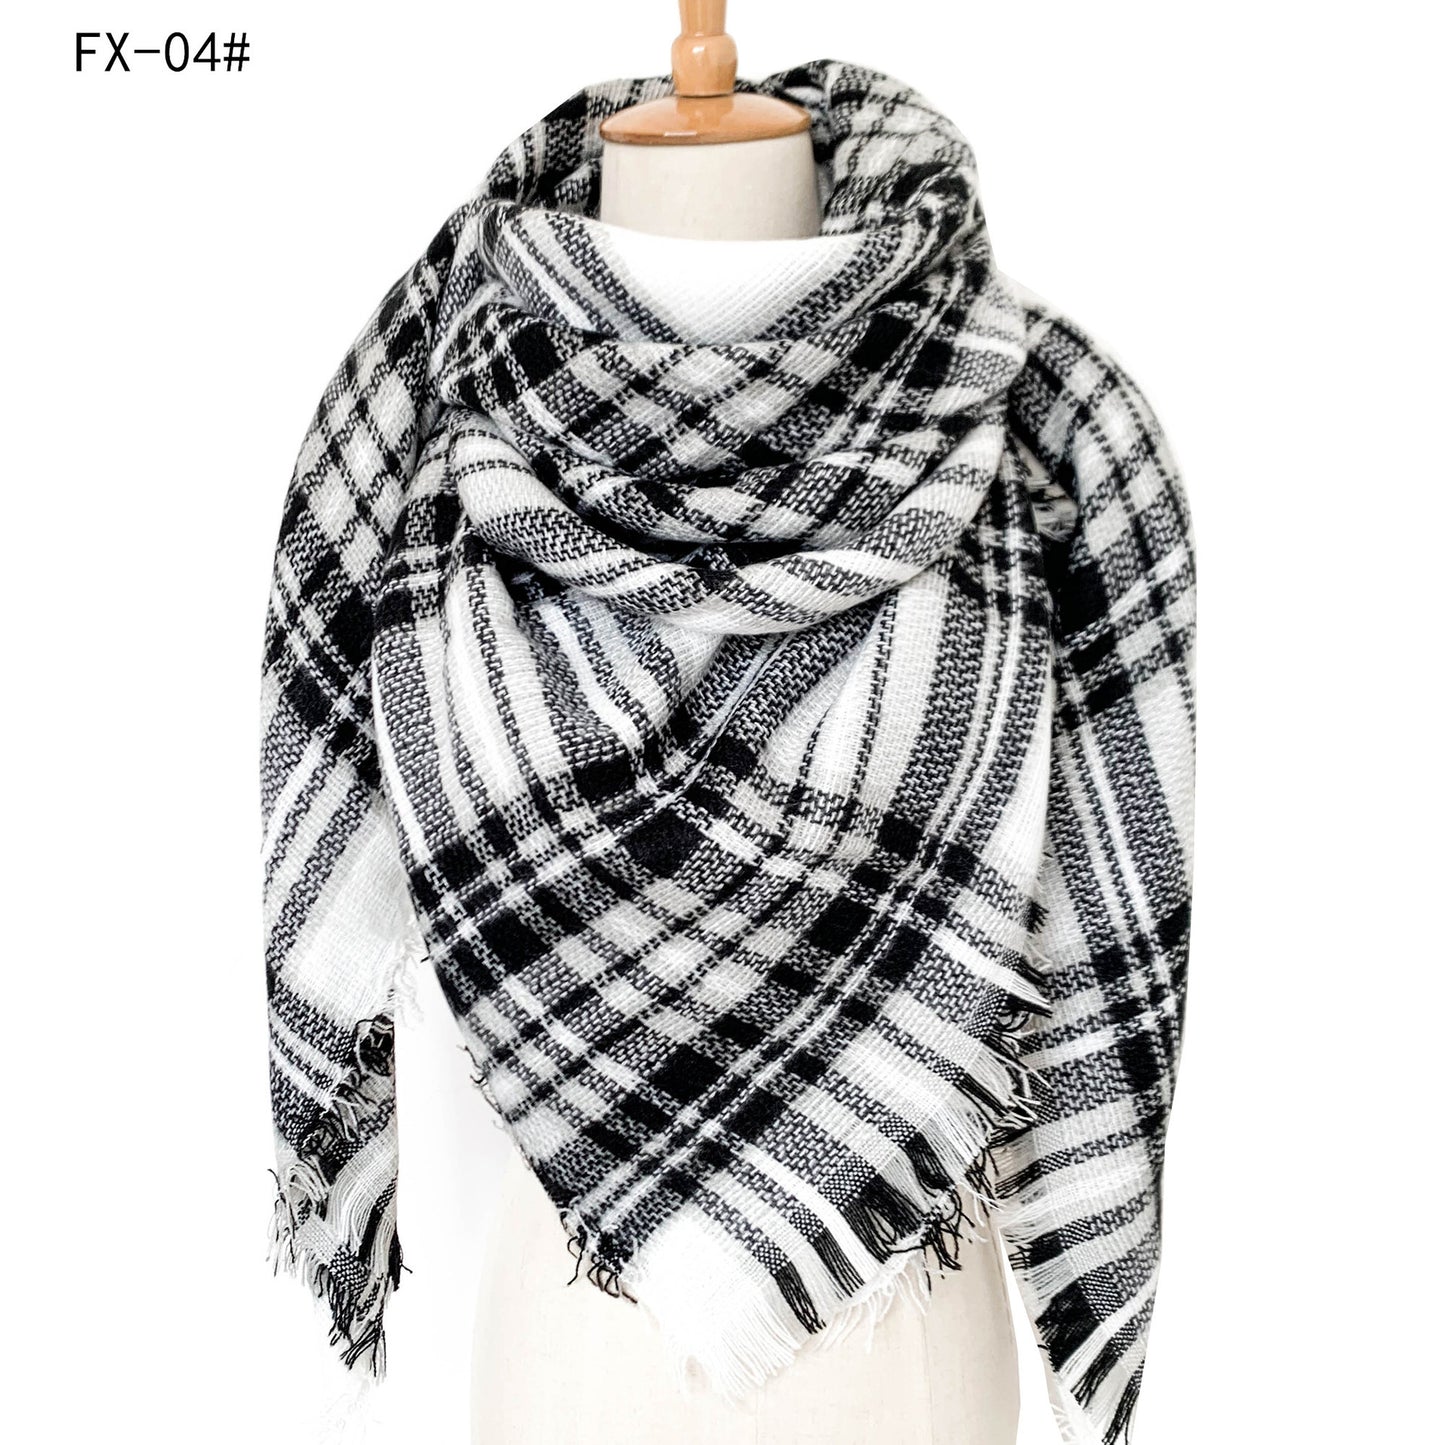 Double-Sided Colorful Plaid Scarf with Cashmere-like Feel - myETYN